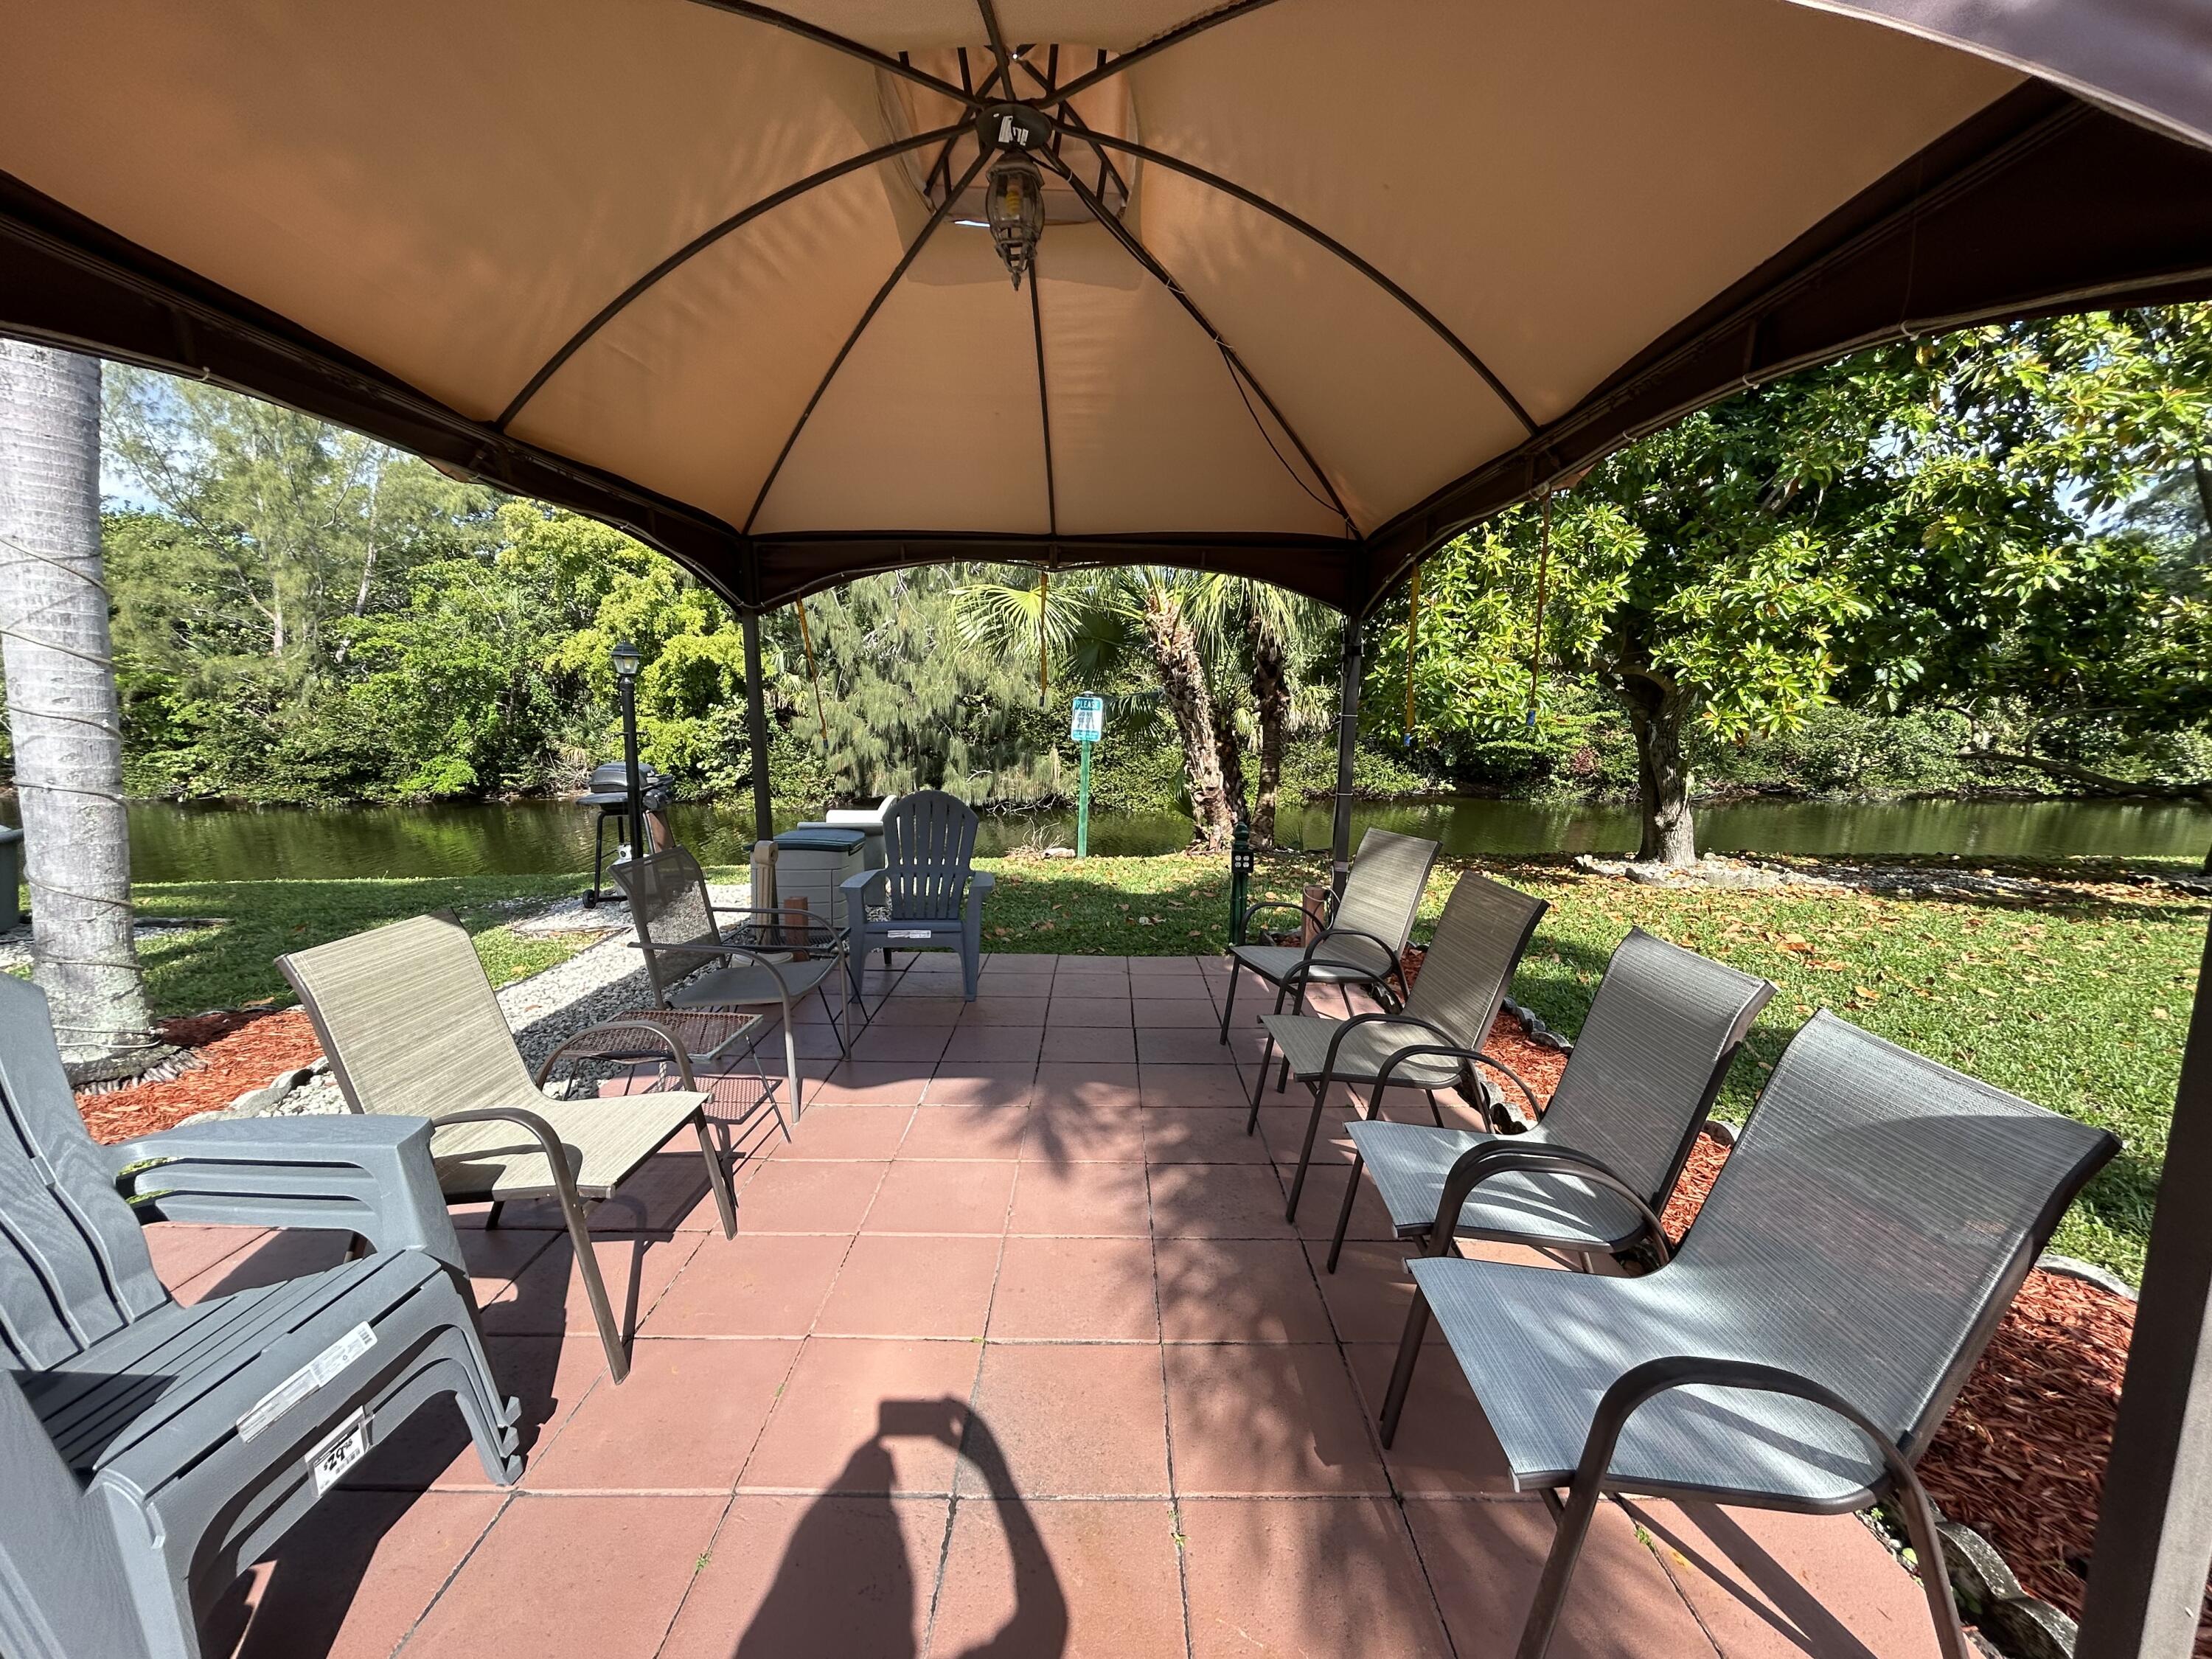 a view of a patio with a table chairs and a umbrella